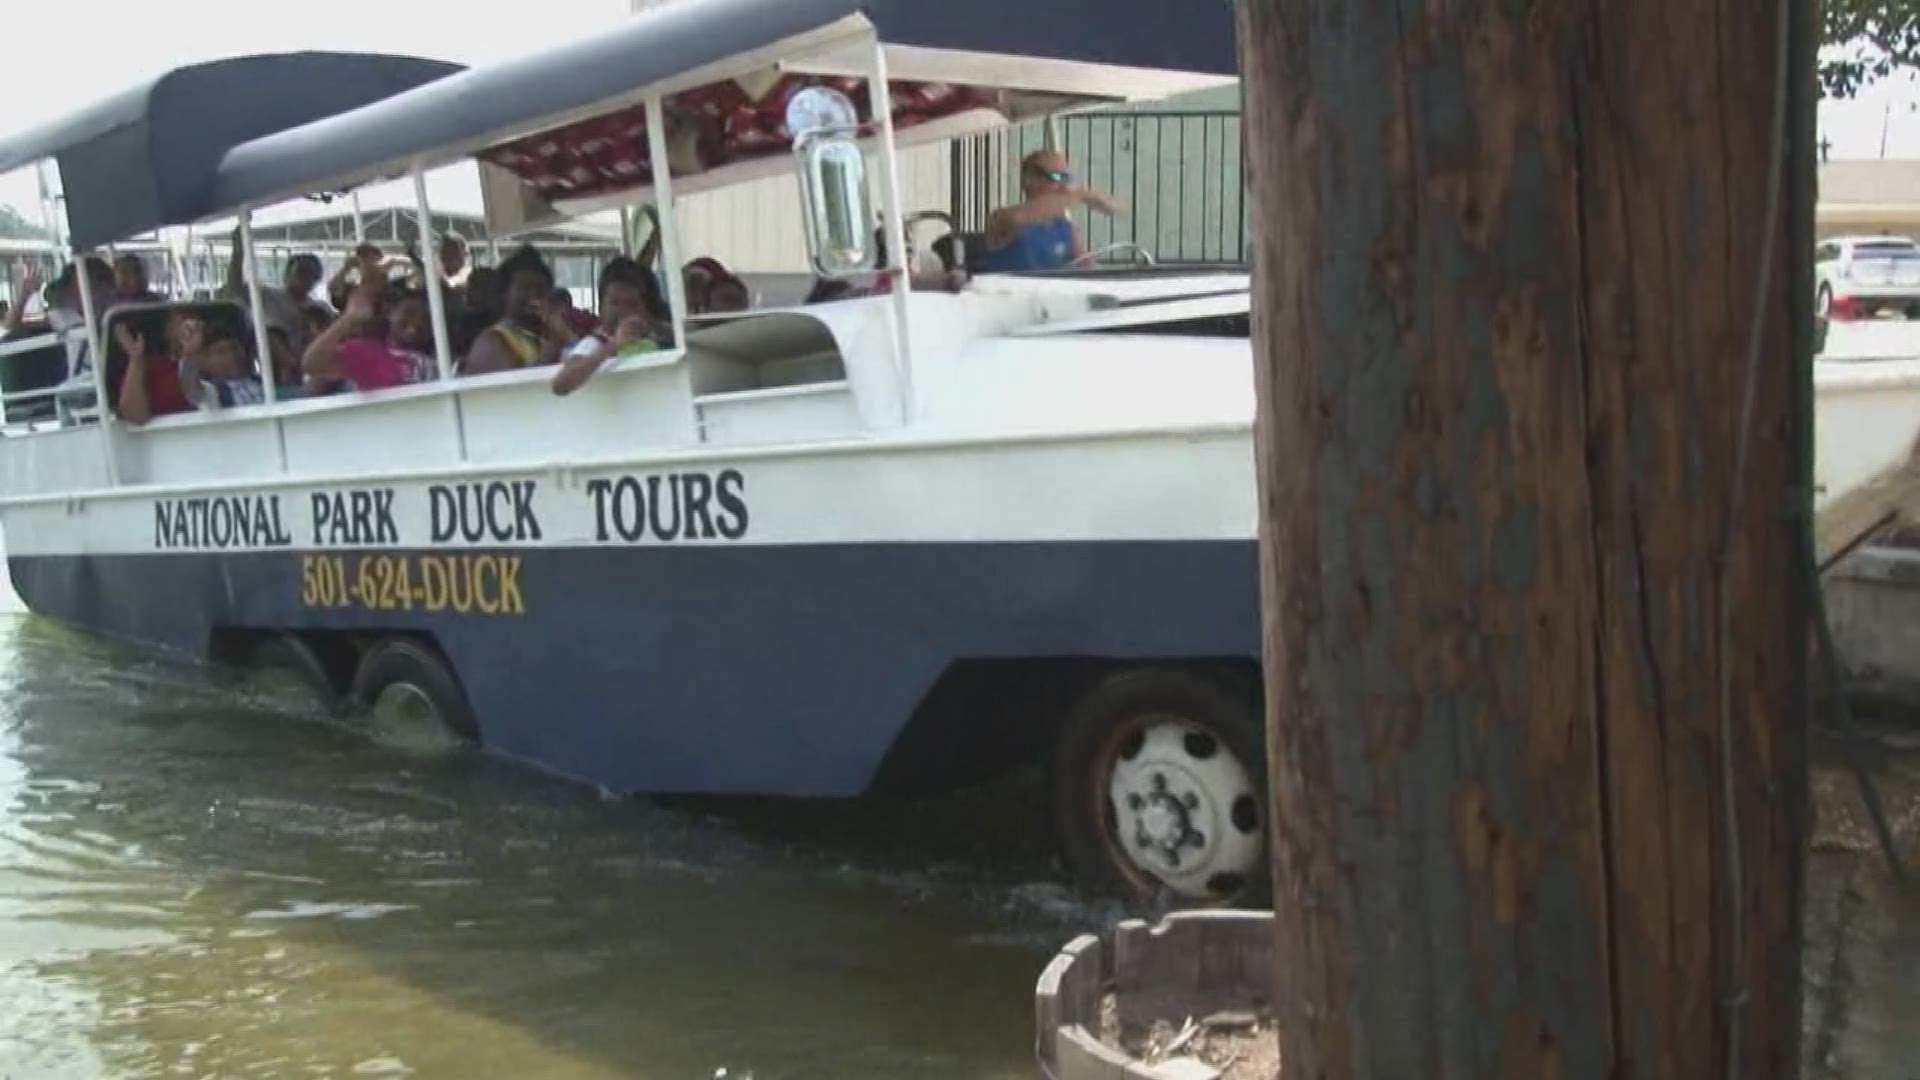 National Park Duck Tours in Hot Springs continues to operate after tragedy in Branson.